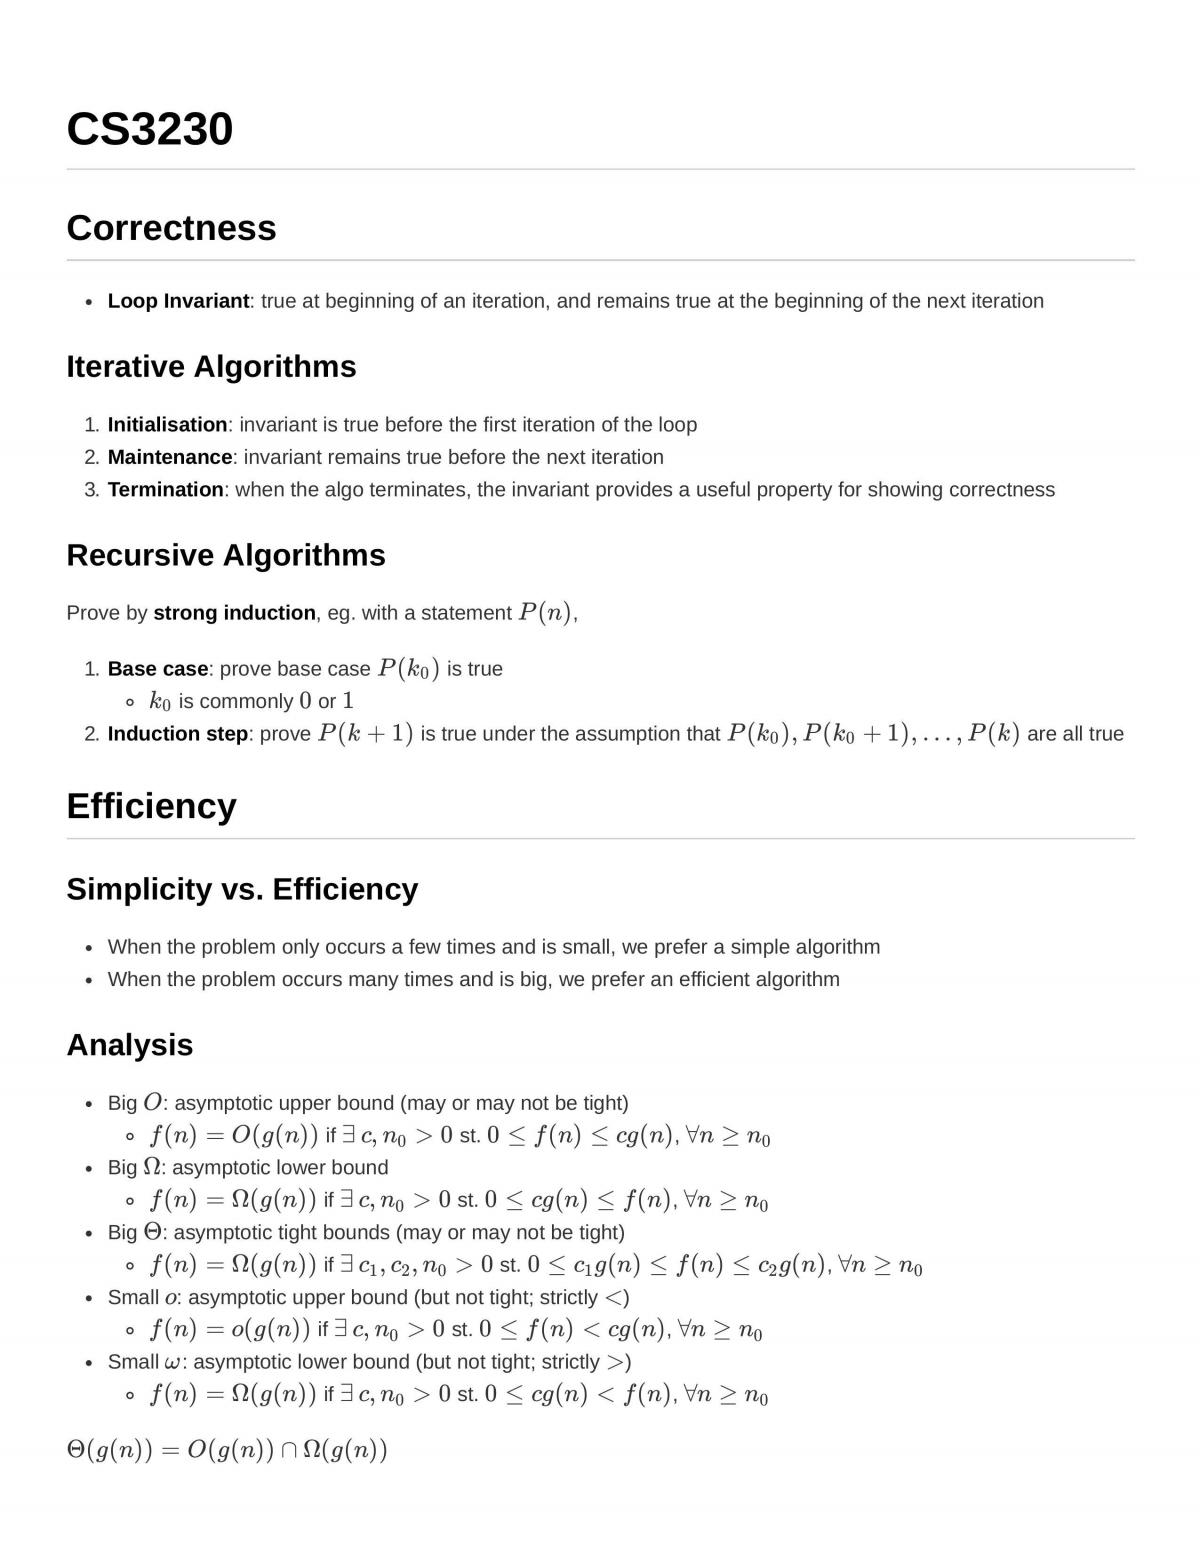 Design and Analysis of Algorithms Summary Notes - Page 1